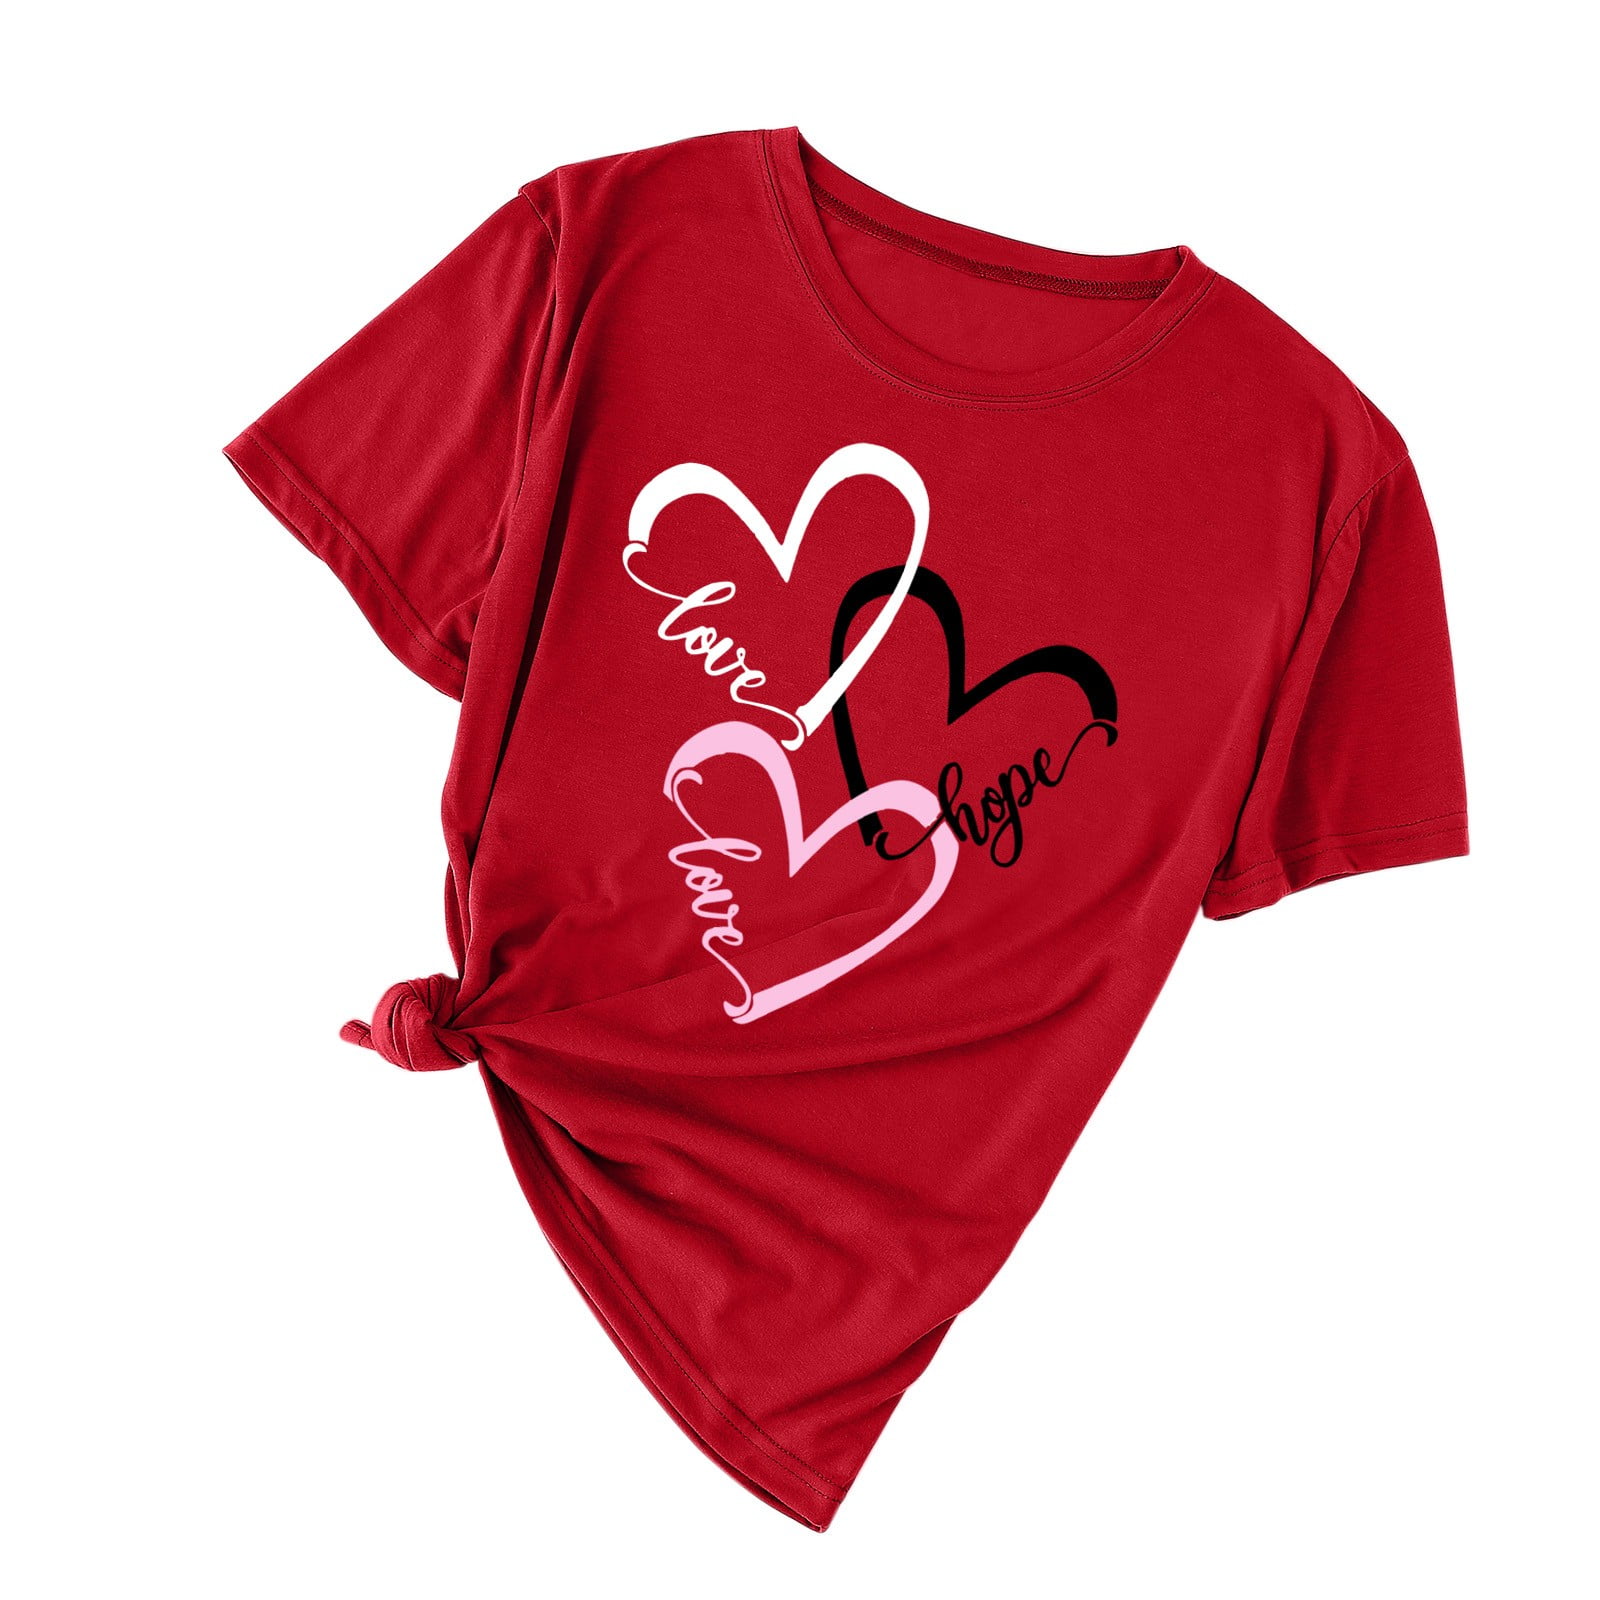 Womens Plus Size Tops Women Valentine's Day Love Printed Solid Color Top  Short Sleeve T-Shirt